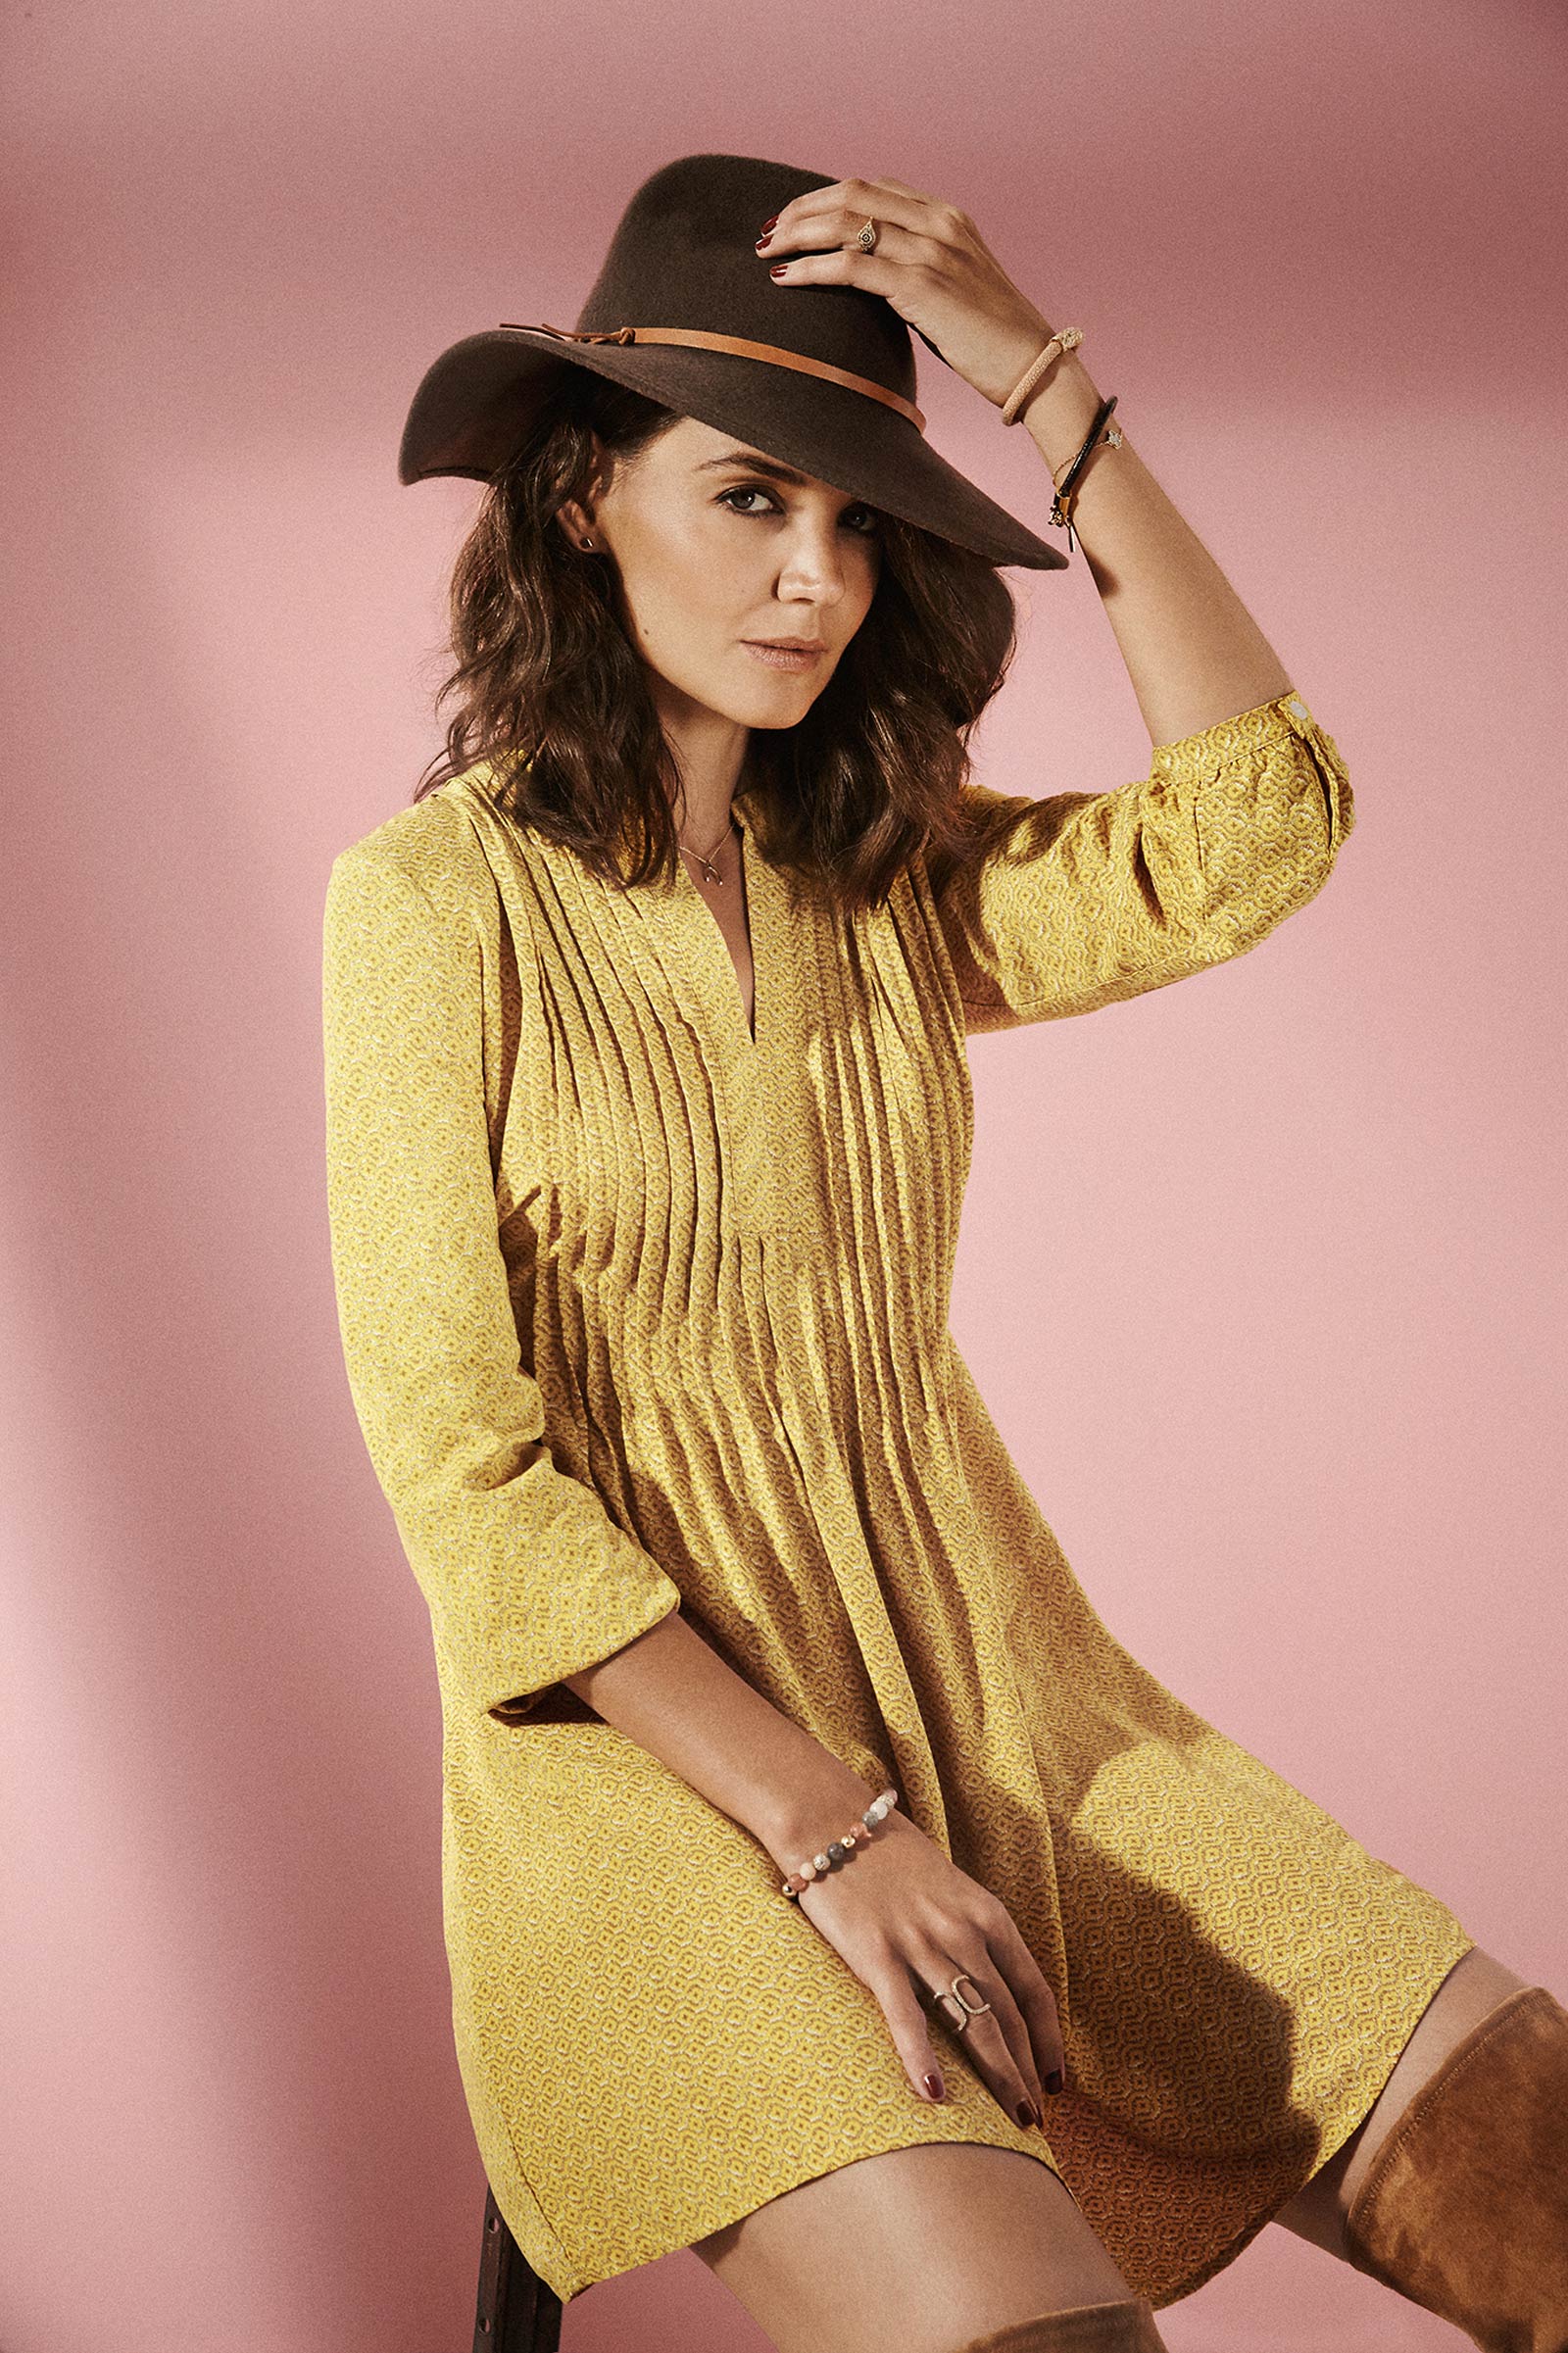 Katie Holmes photoshoot for Refinery29 by Olivia Malone